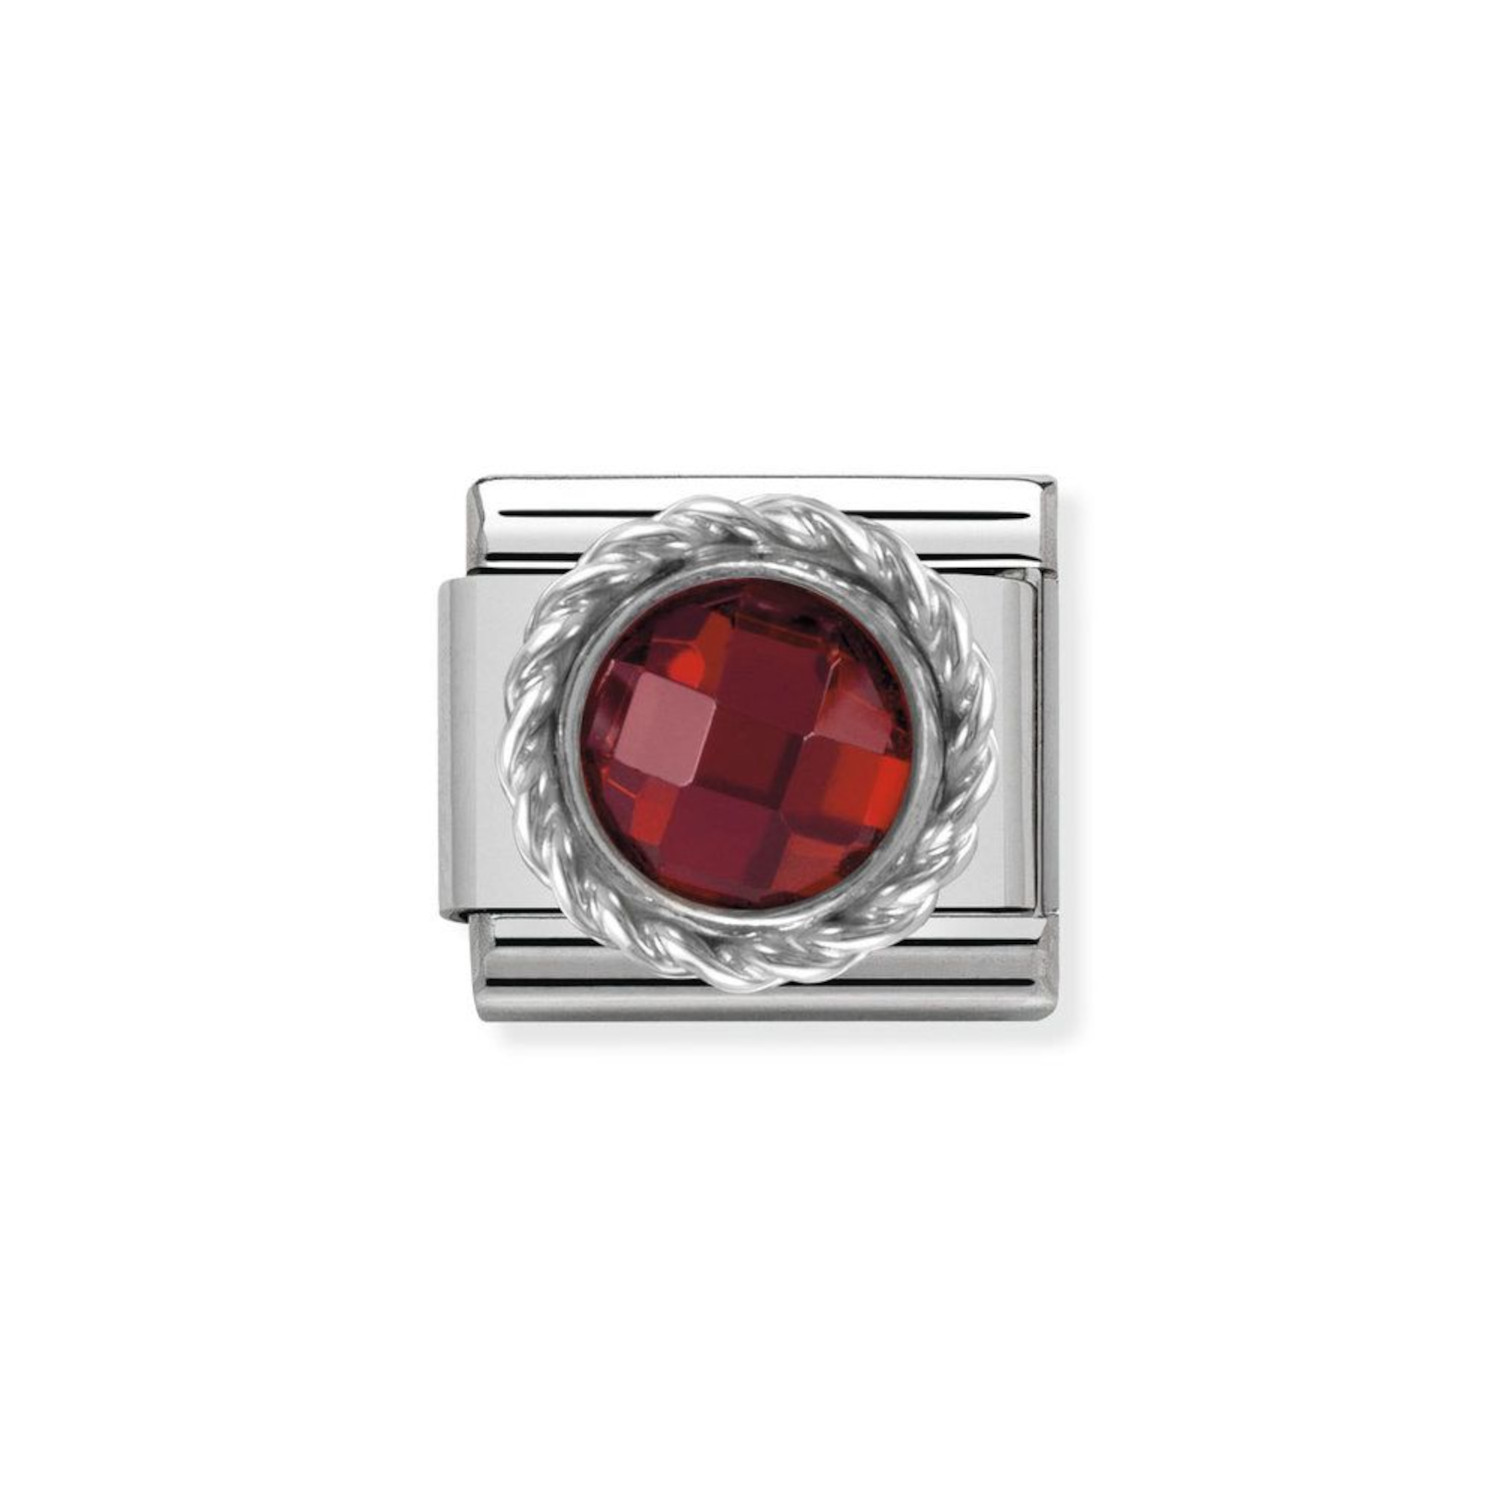 NOMINATION COMPOSABLE CLASSIC LINK IN STERLING SILVER WITH ROUND FACETED RED STONE 330601/005